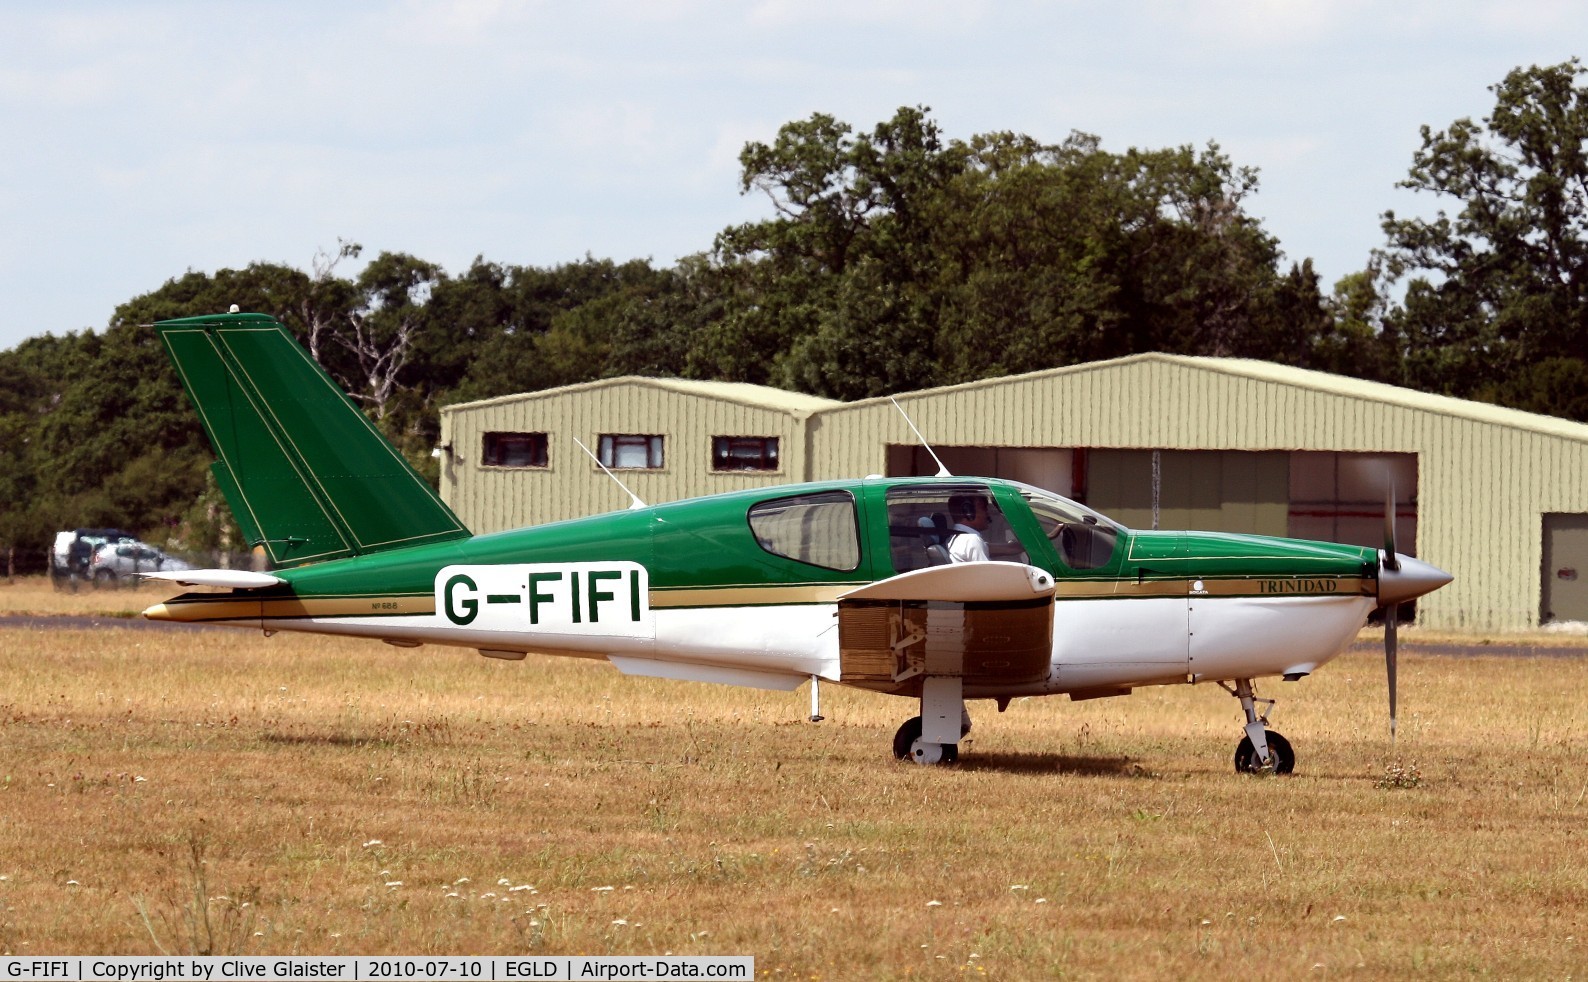 G-FIFI, 1986 Socata TB-20 Trinidad C/N 688, Ex: Ex: G-BMWS > G-FIFI - Originally owned to, Air Touring Services Ltd in September 1986 as G-BMWS and currently in private hands since, April 2000 as G-FIFI.